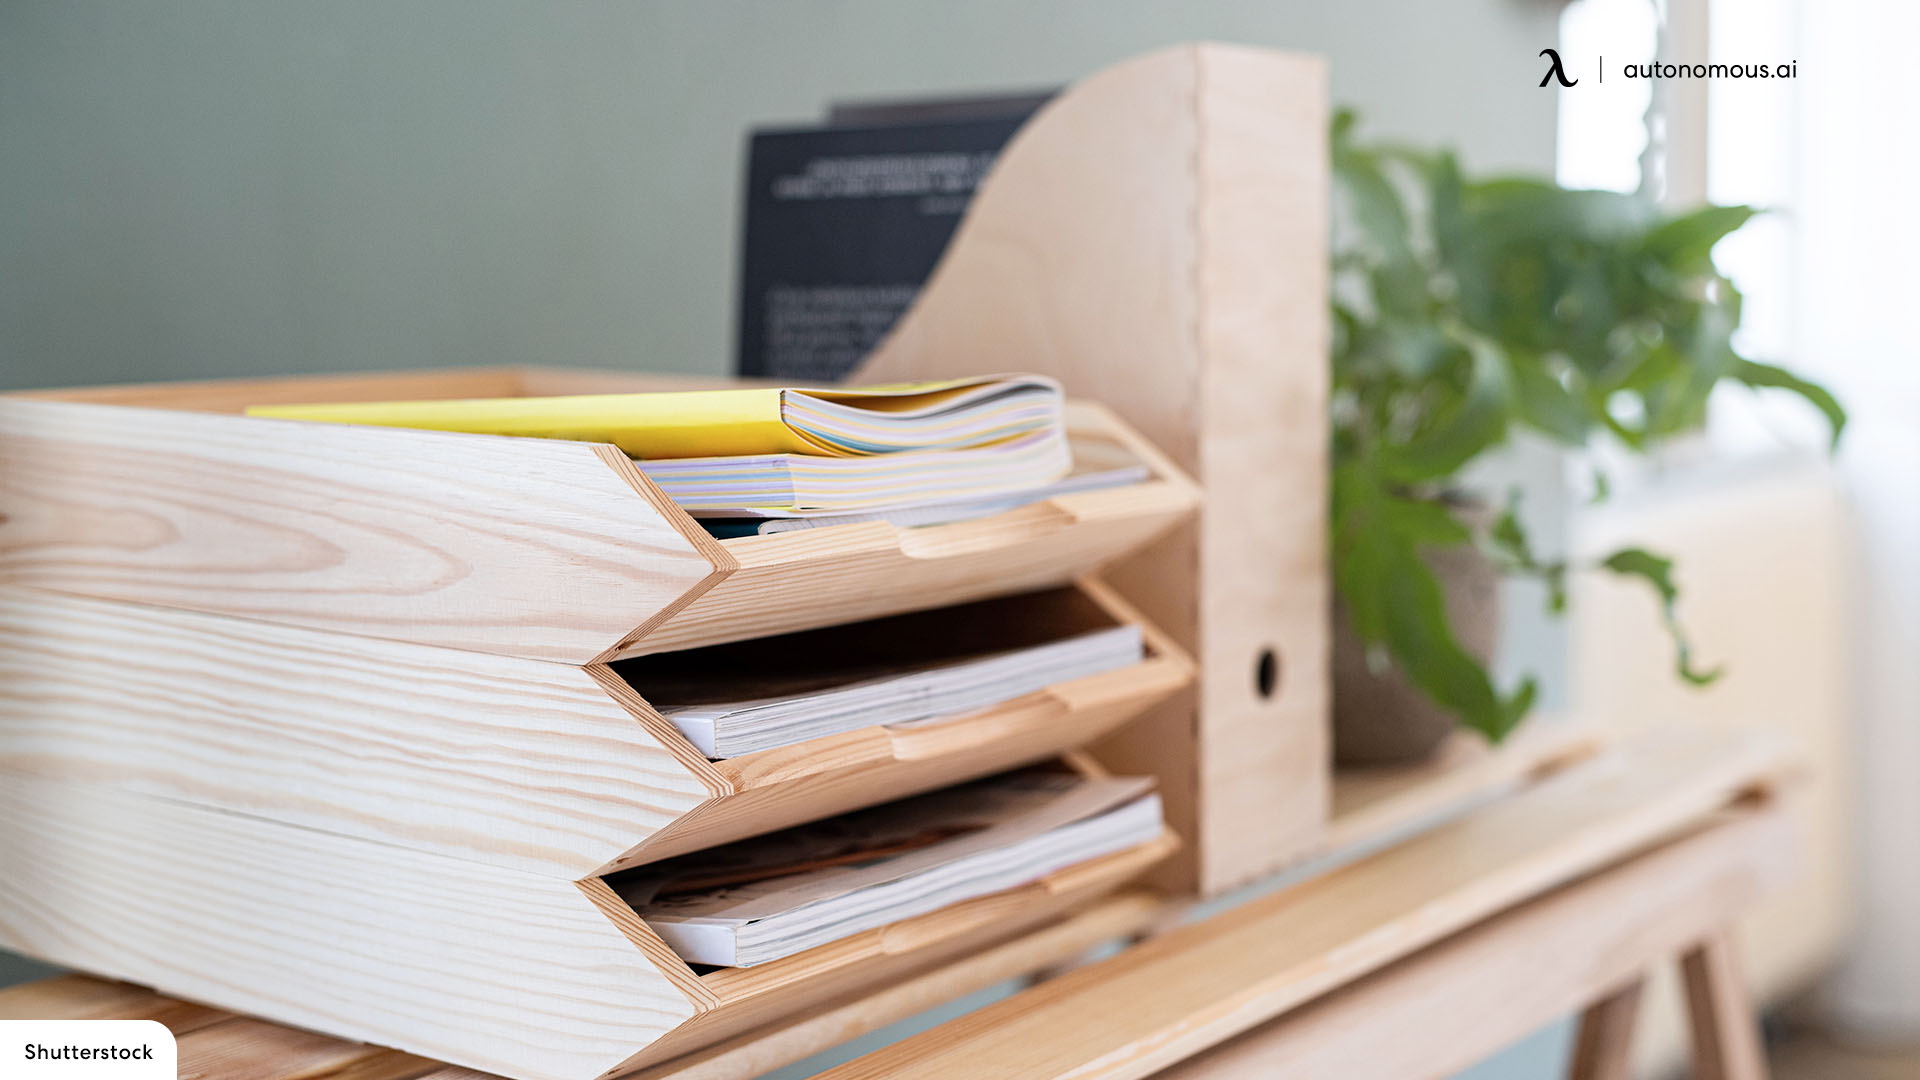 Paper holders in chic desk